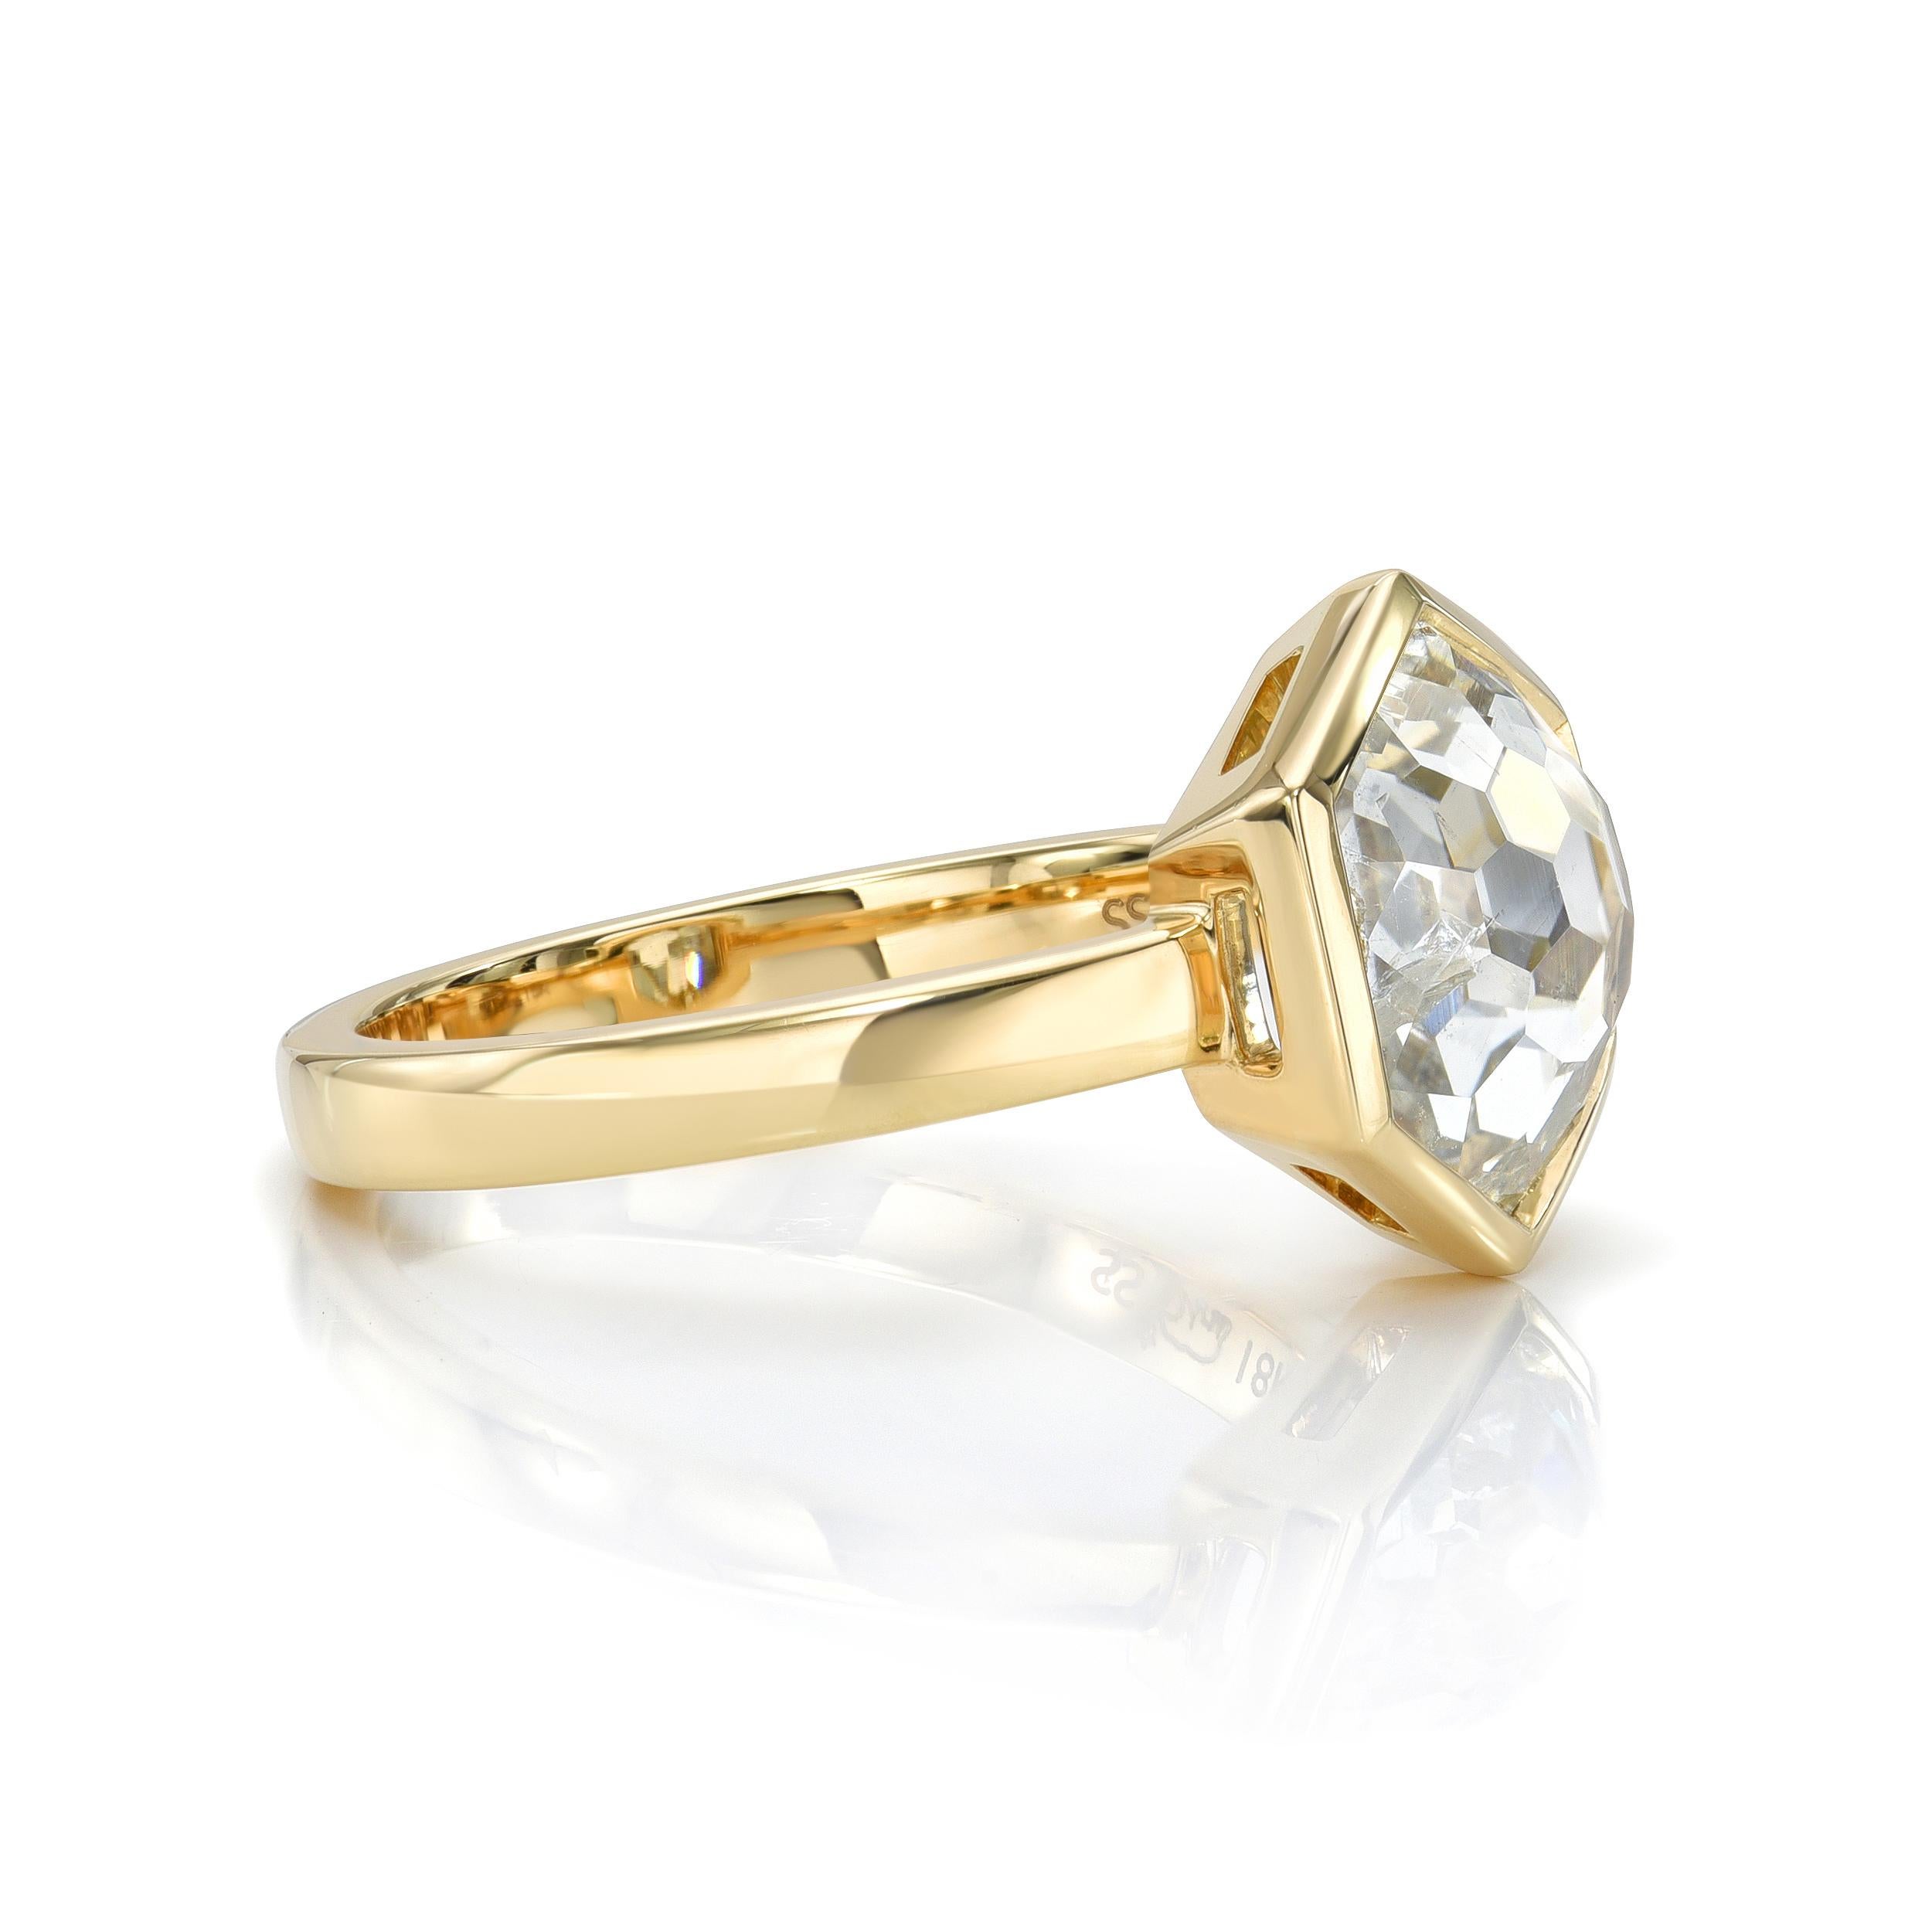 1.88ct J/I2 GIA certified hexagonal rose cut diamond bezel set in a handcrafted 18K yellow gold mounting.